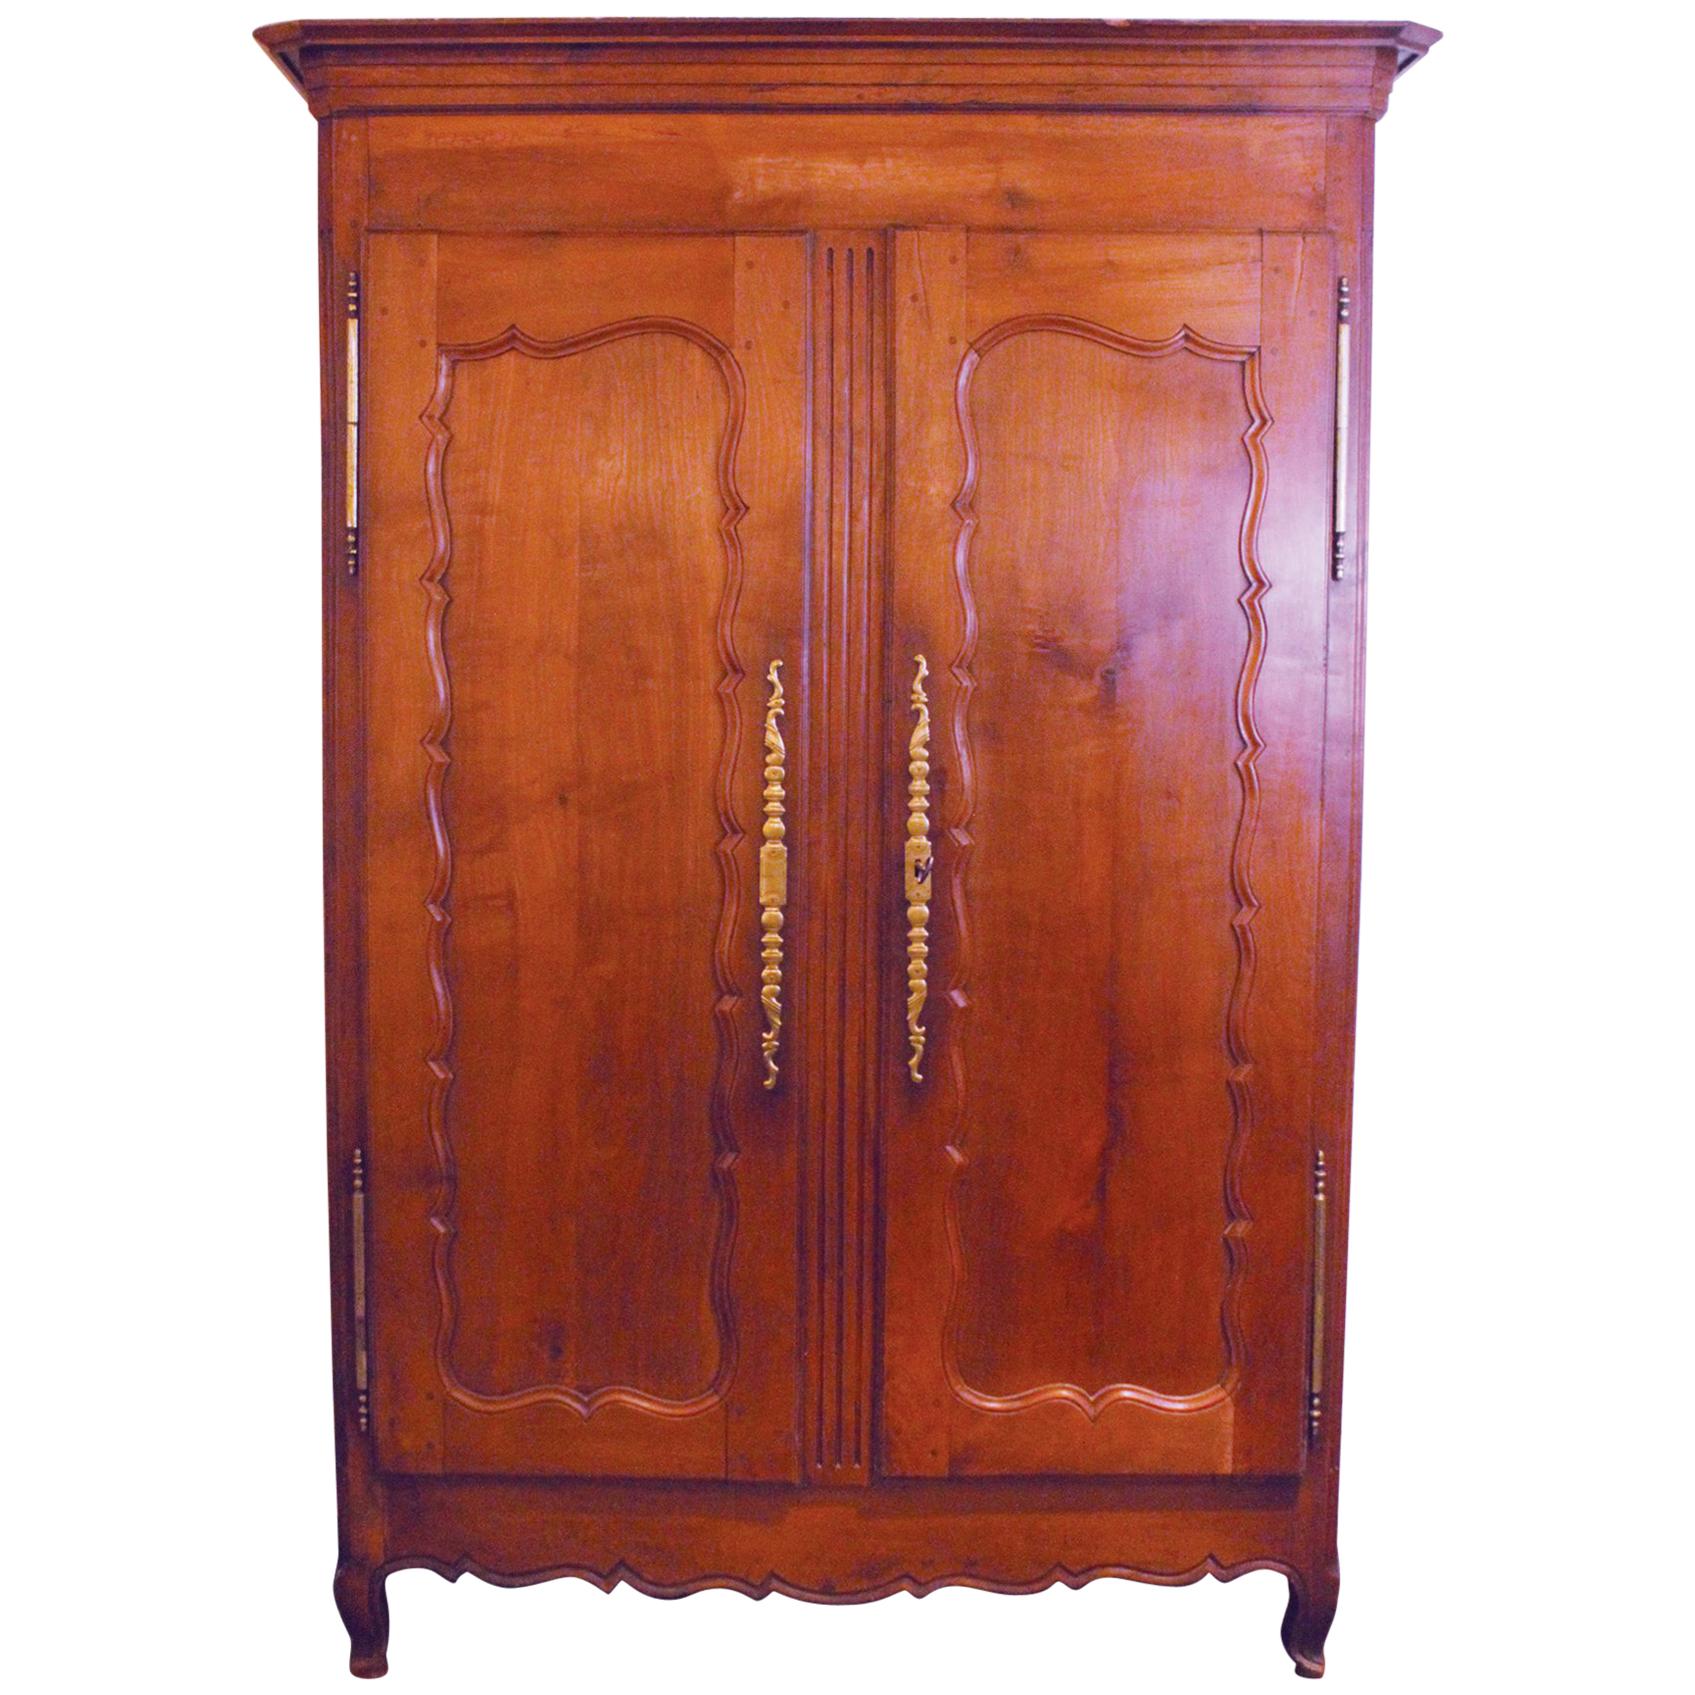 Country French Two-Door Armoire, All Hand Pegged Construction, circa 1800-1820